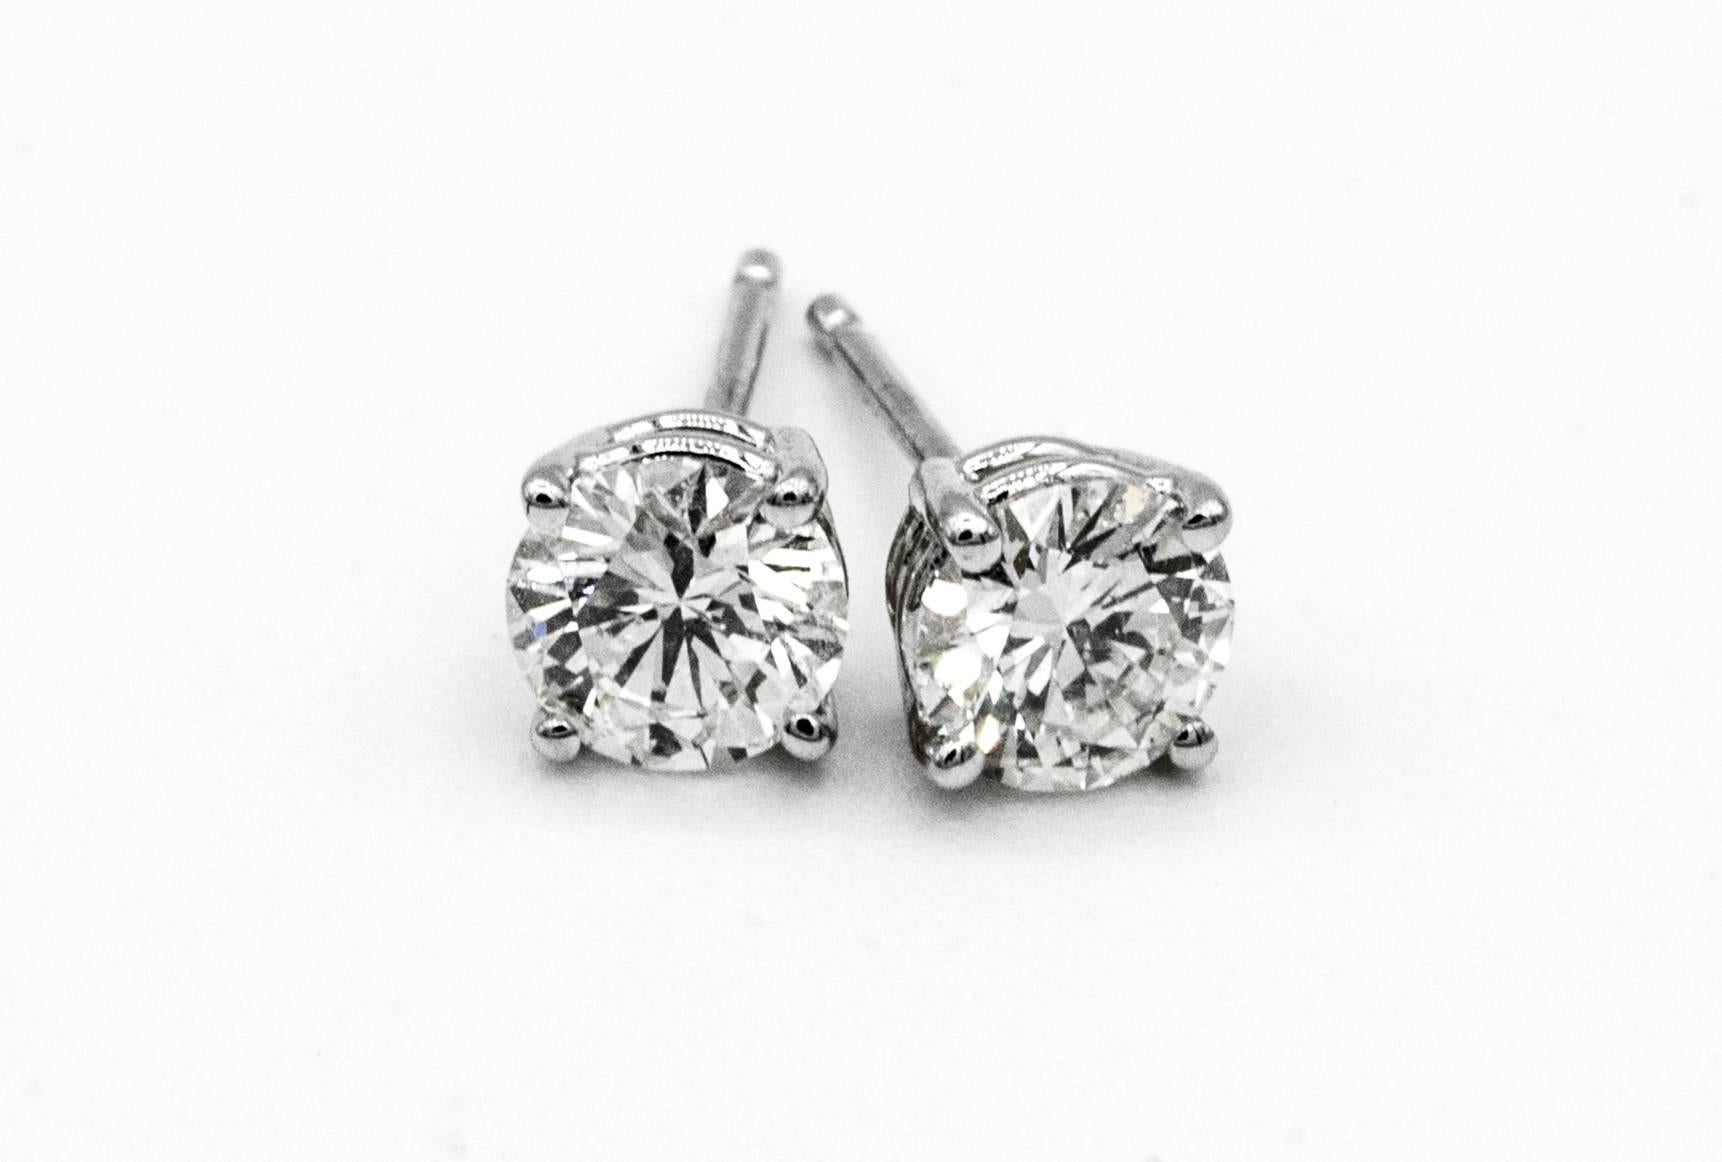 .91 Carat Diamond Stud earrings in 14K White Gold
A pair of Diamond stud earrings weighing .91 Carats total. 
Color is G SI1, and G VS2 ( EGL Certificates)
5.1 MM Diameter, beautifully cut and perfectly matched pair 
